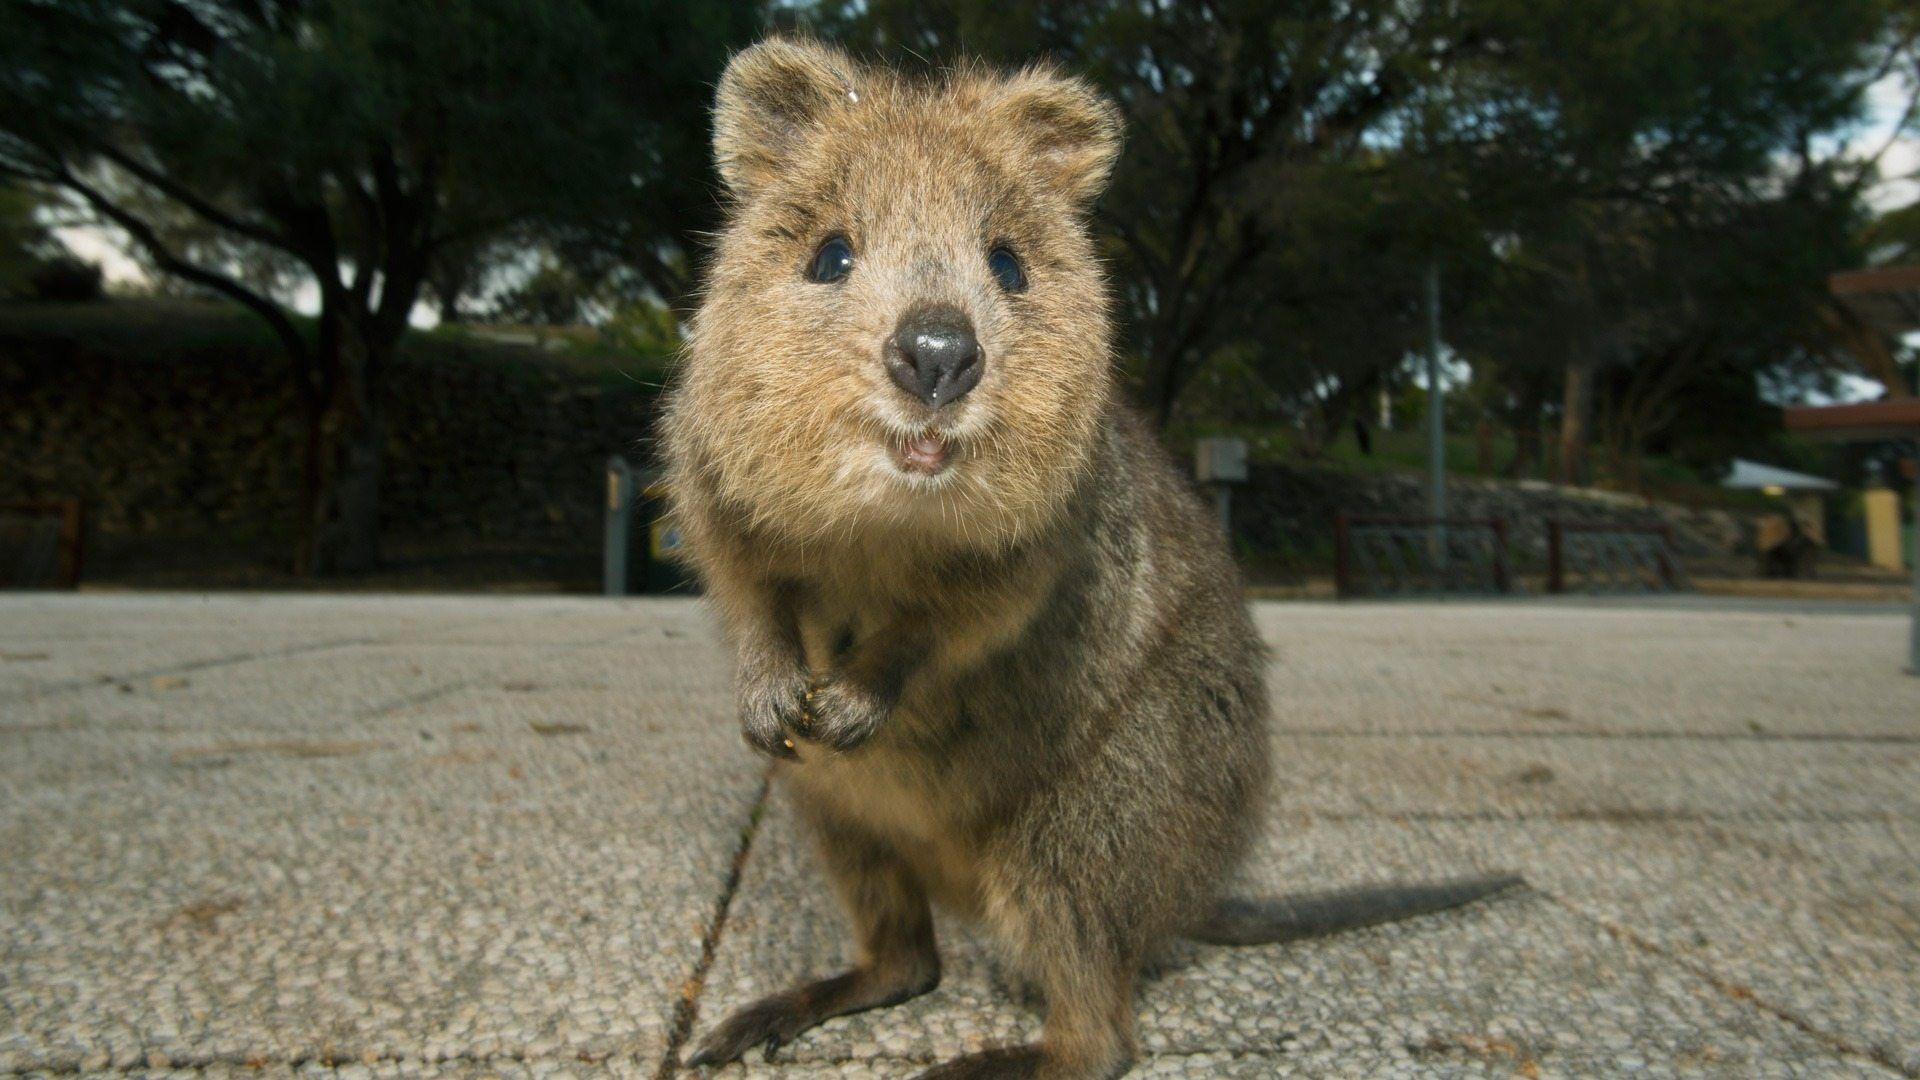 25 Excellent quokka desktop background You Can Save It For Free ...